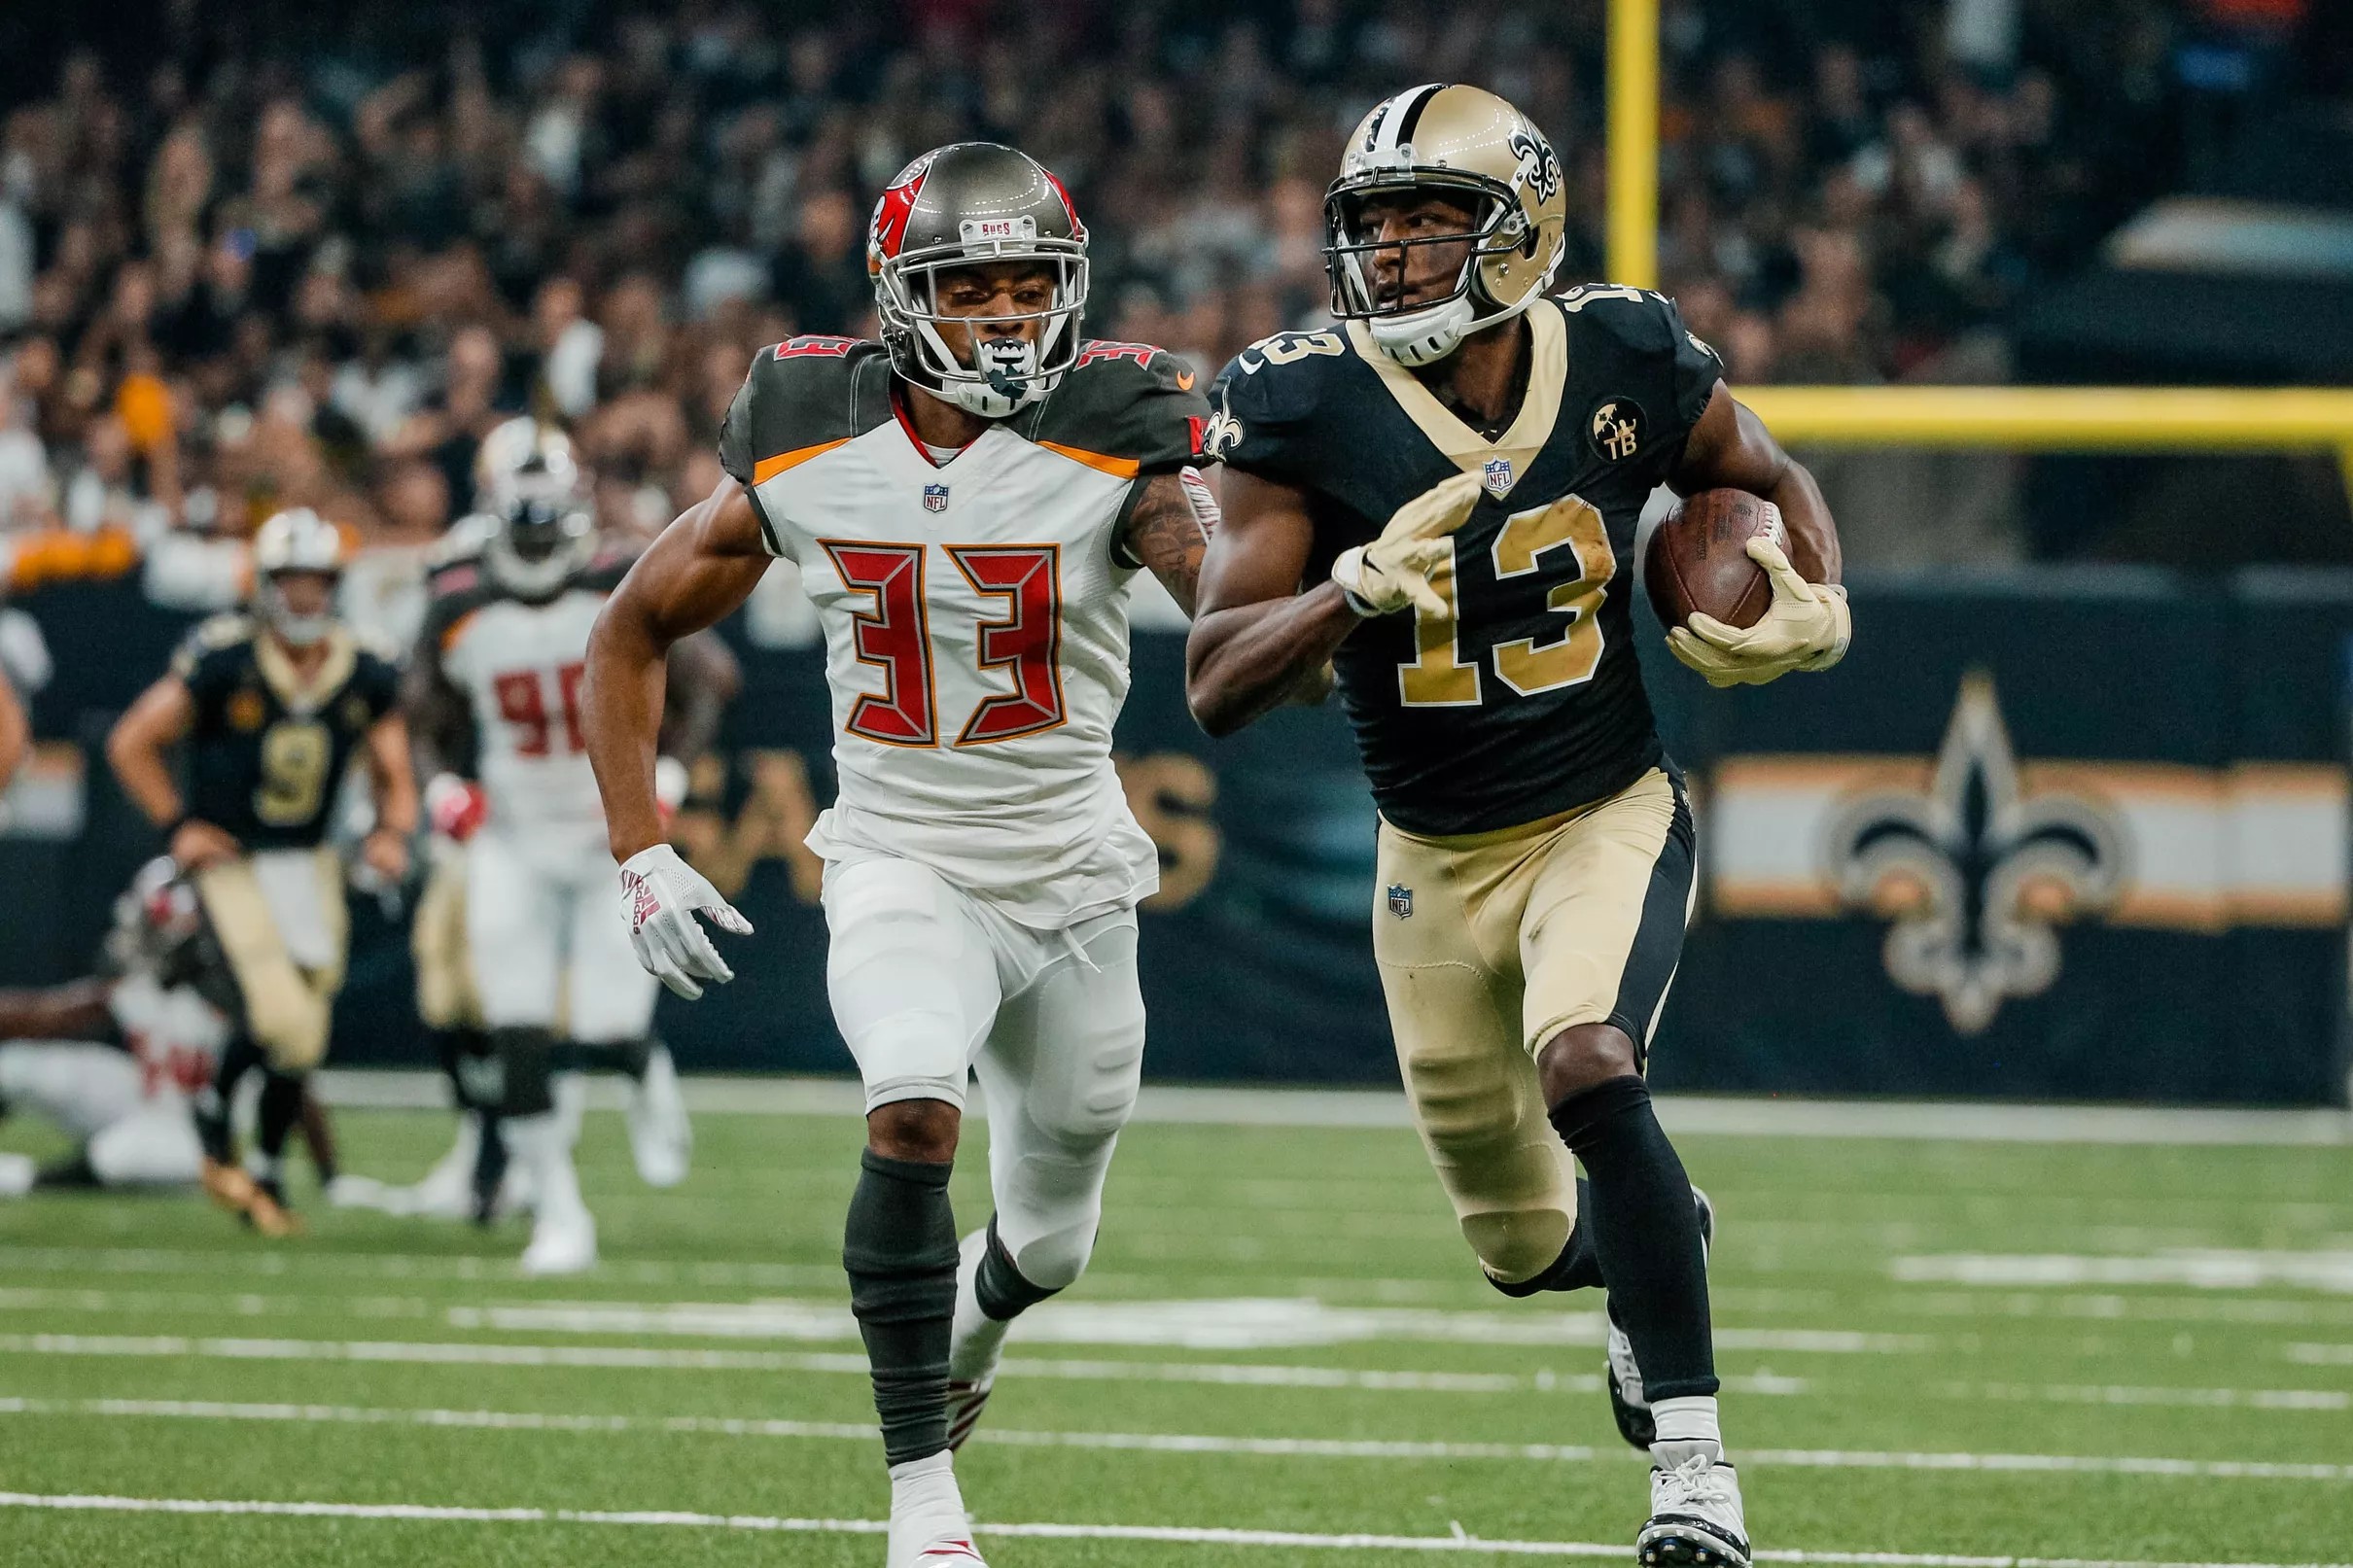 Saints player rankings going into Week 2